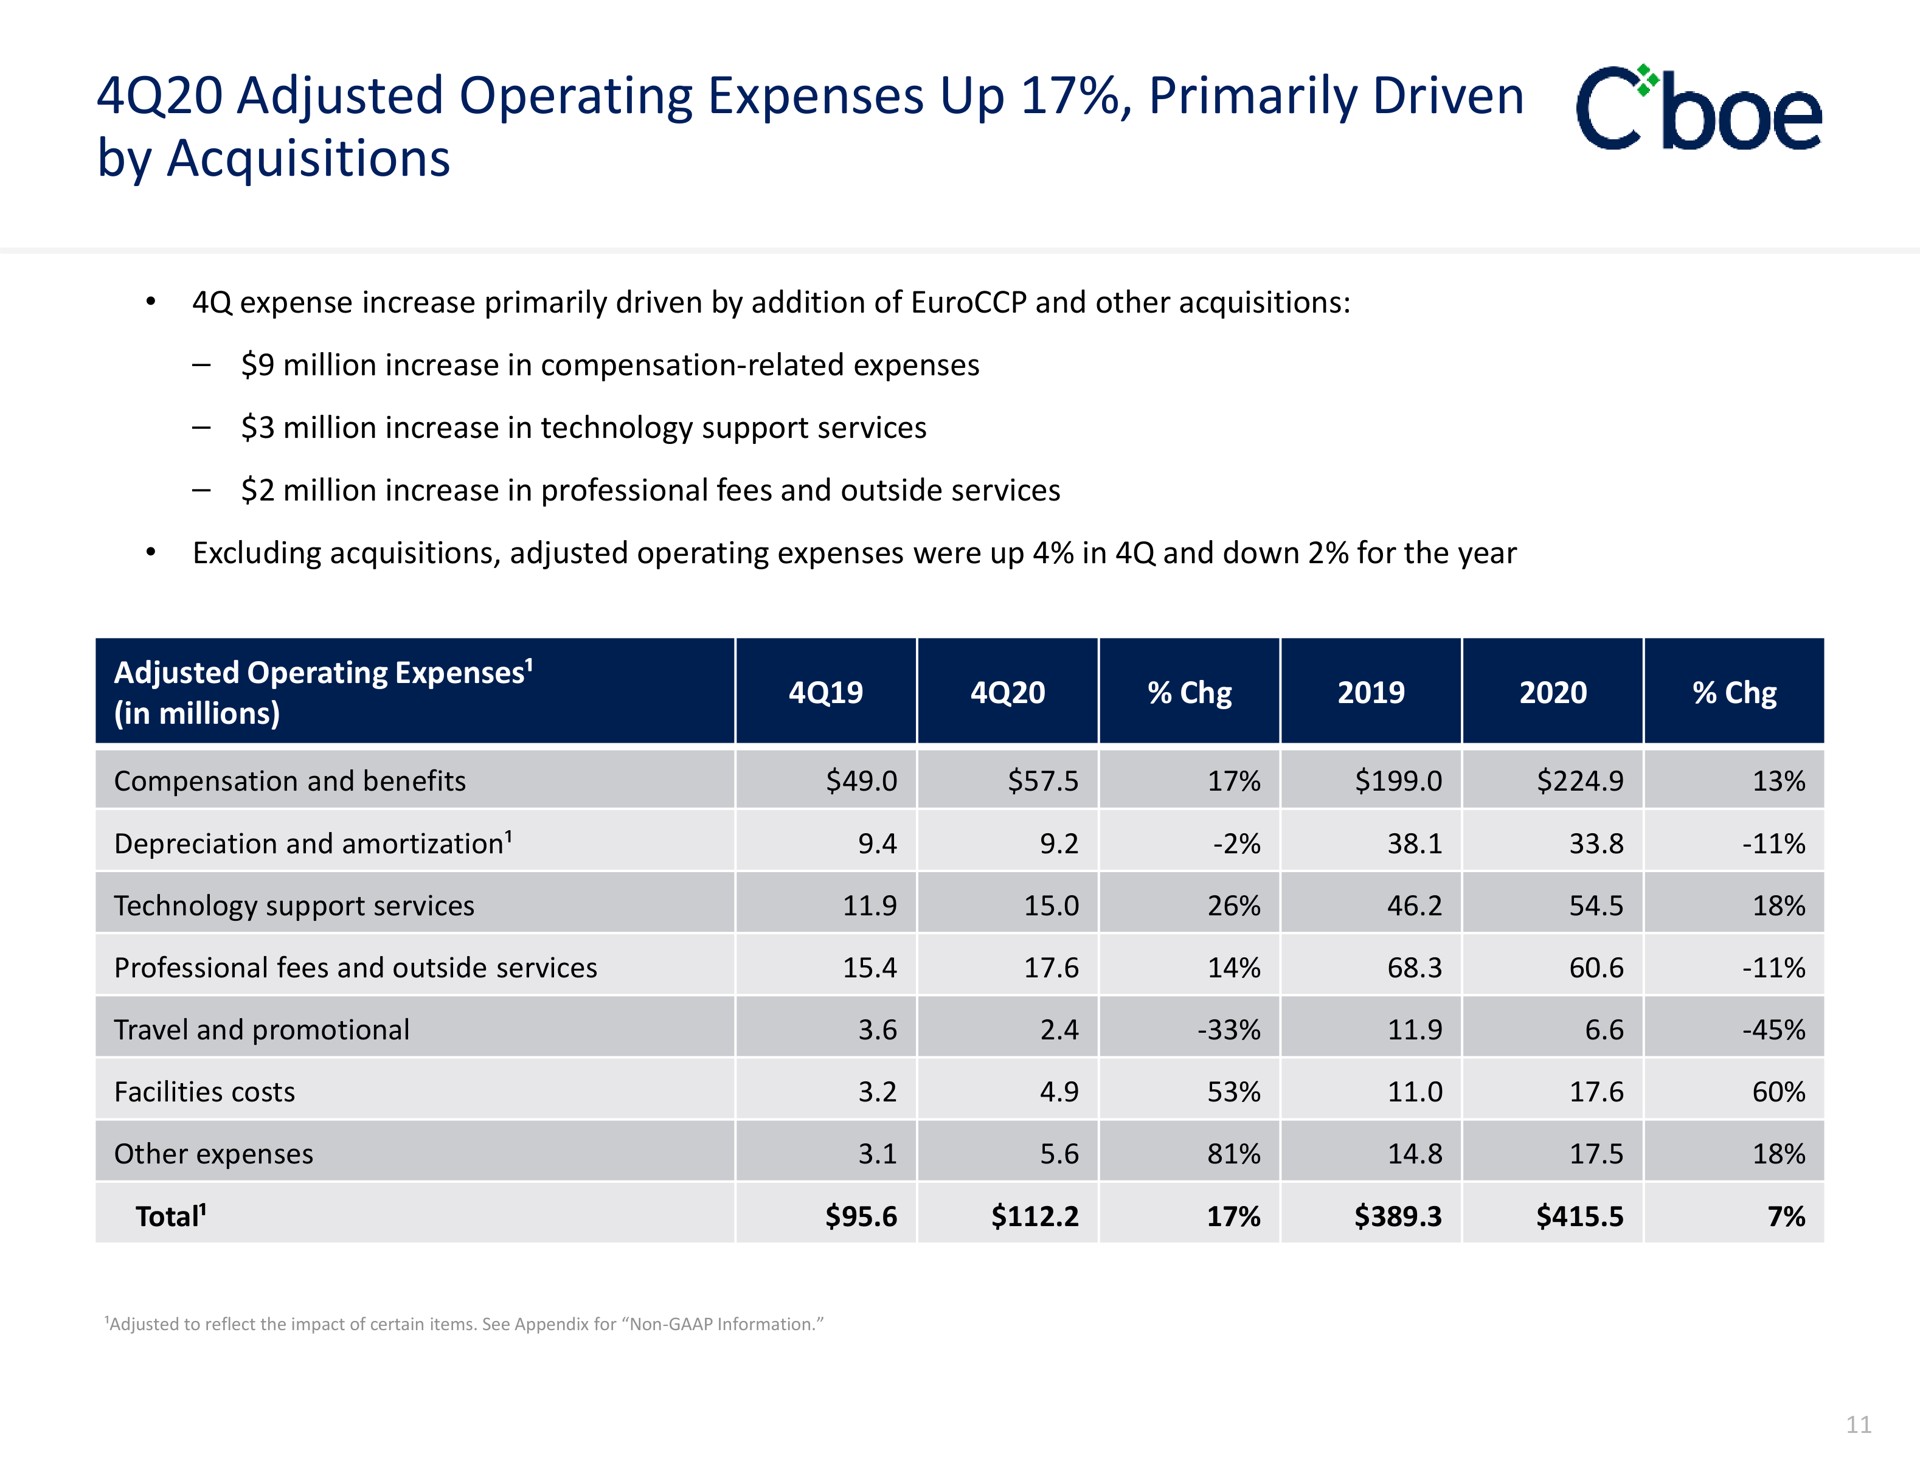 adjusted operating expenses up primarily driven by acquisitions | Cboe